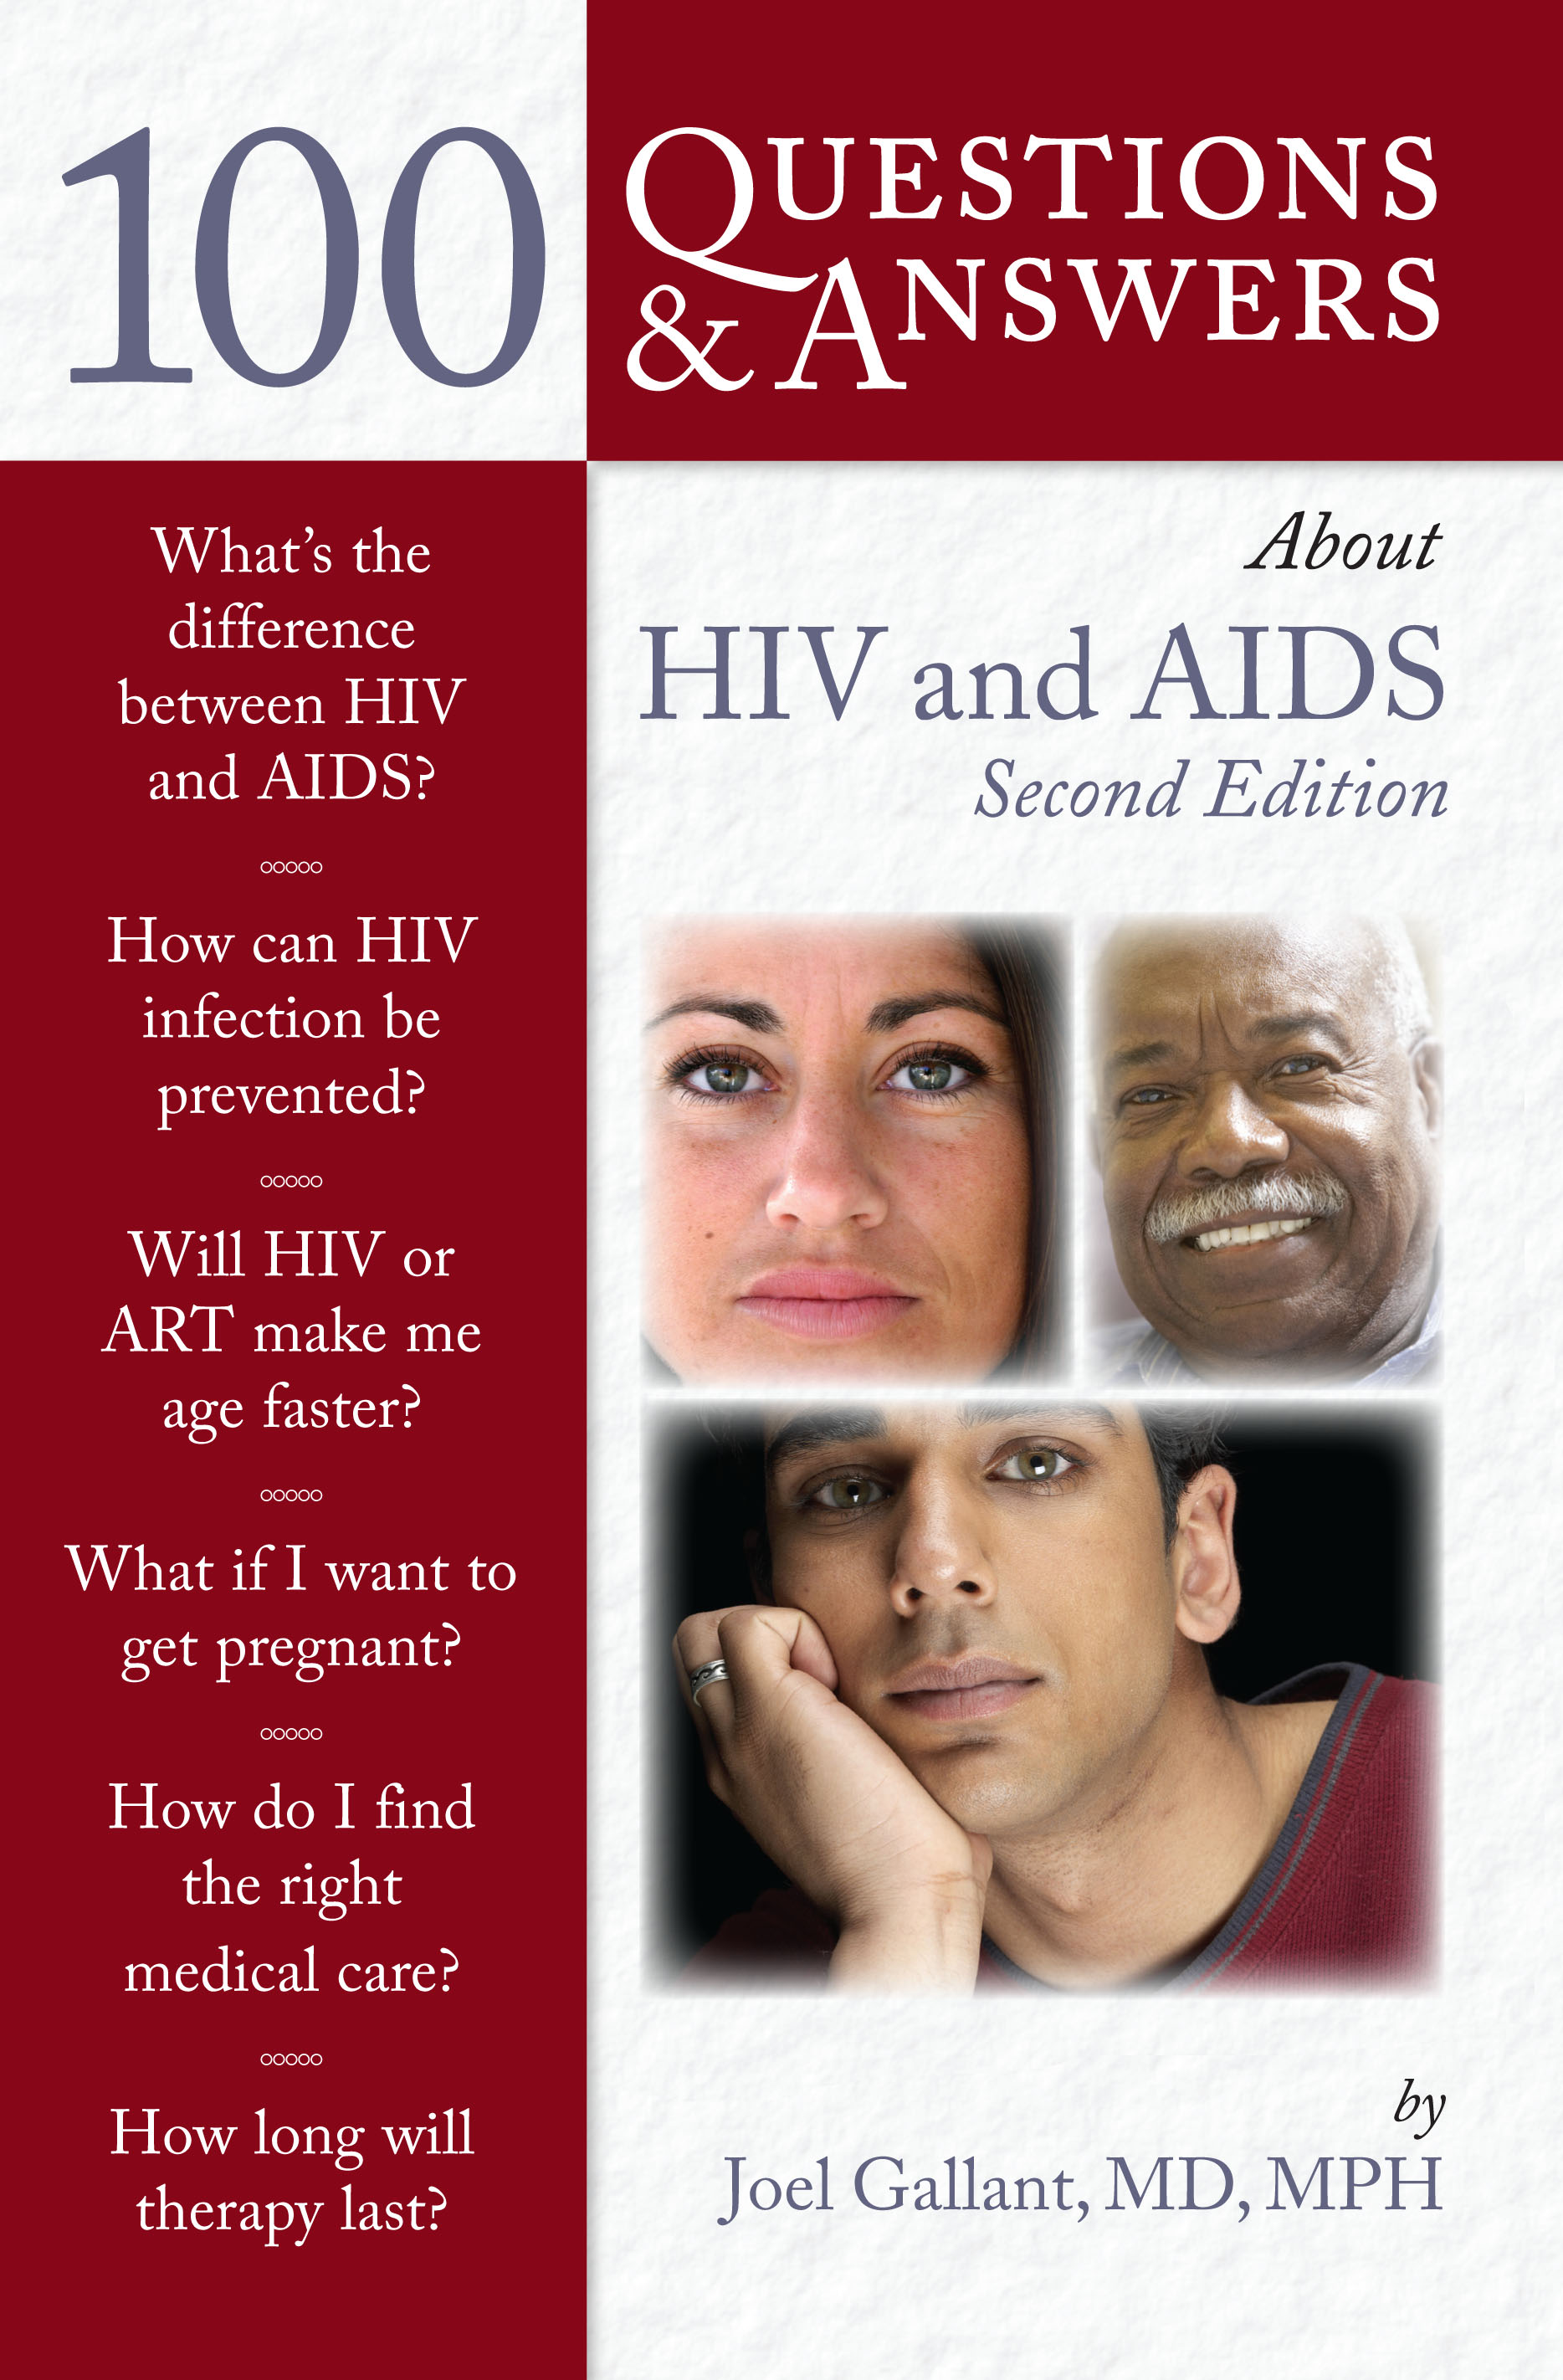 Image of the book cover for '100 Questions & Answers About HIV And AIDS'